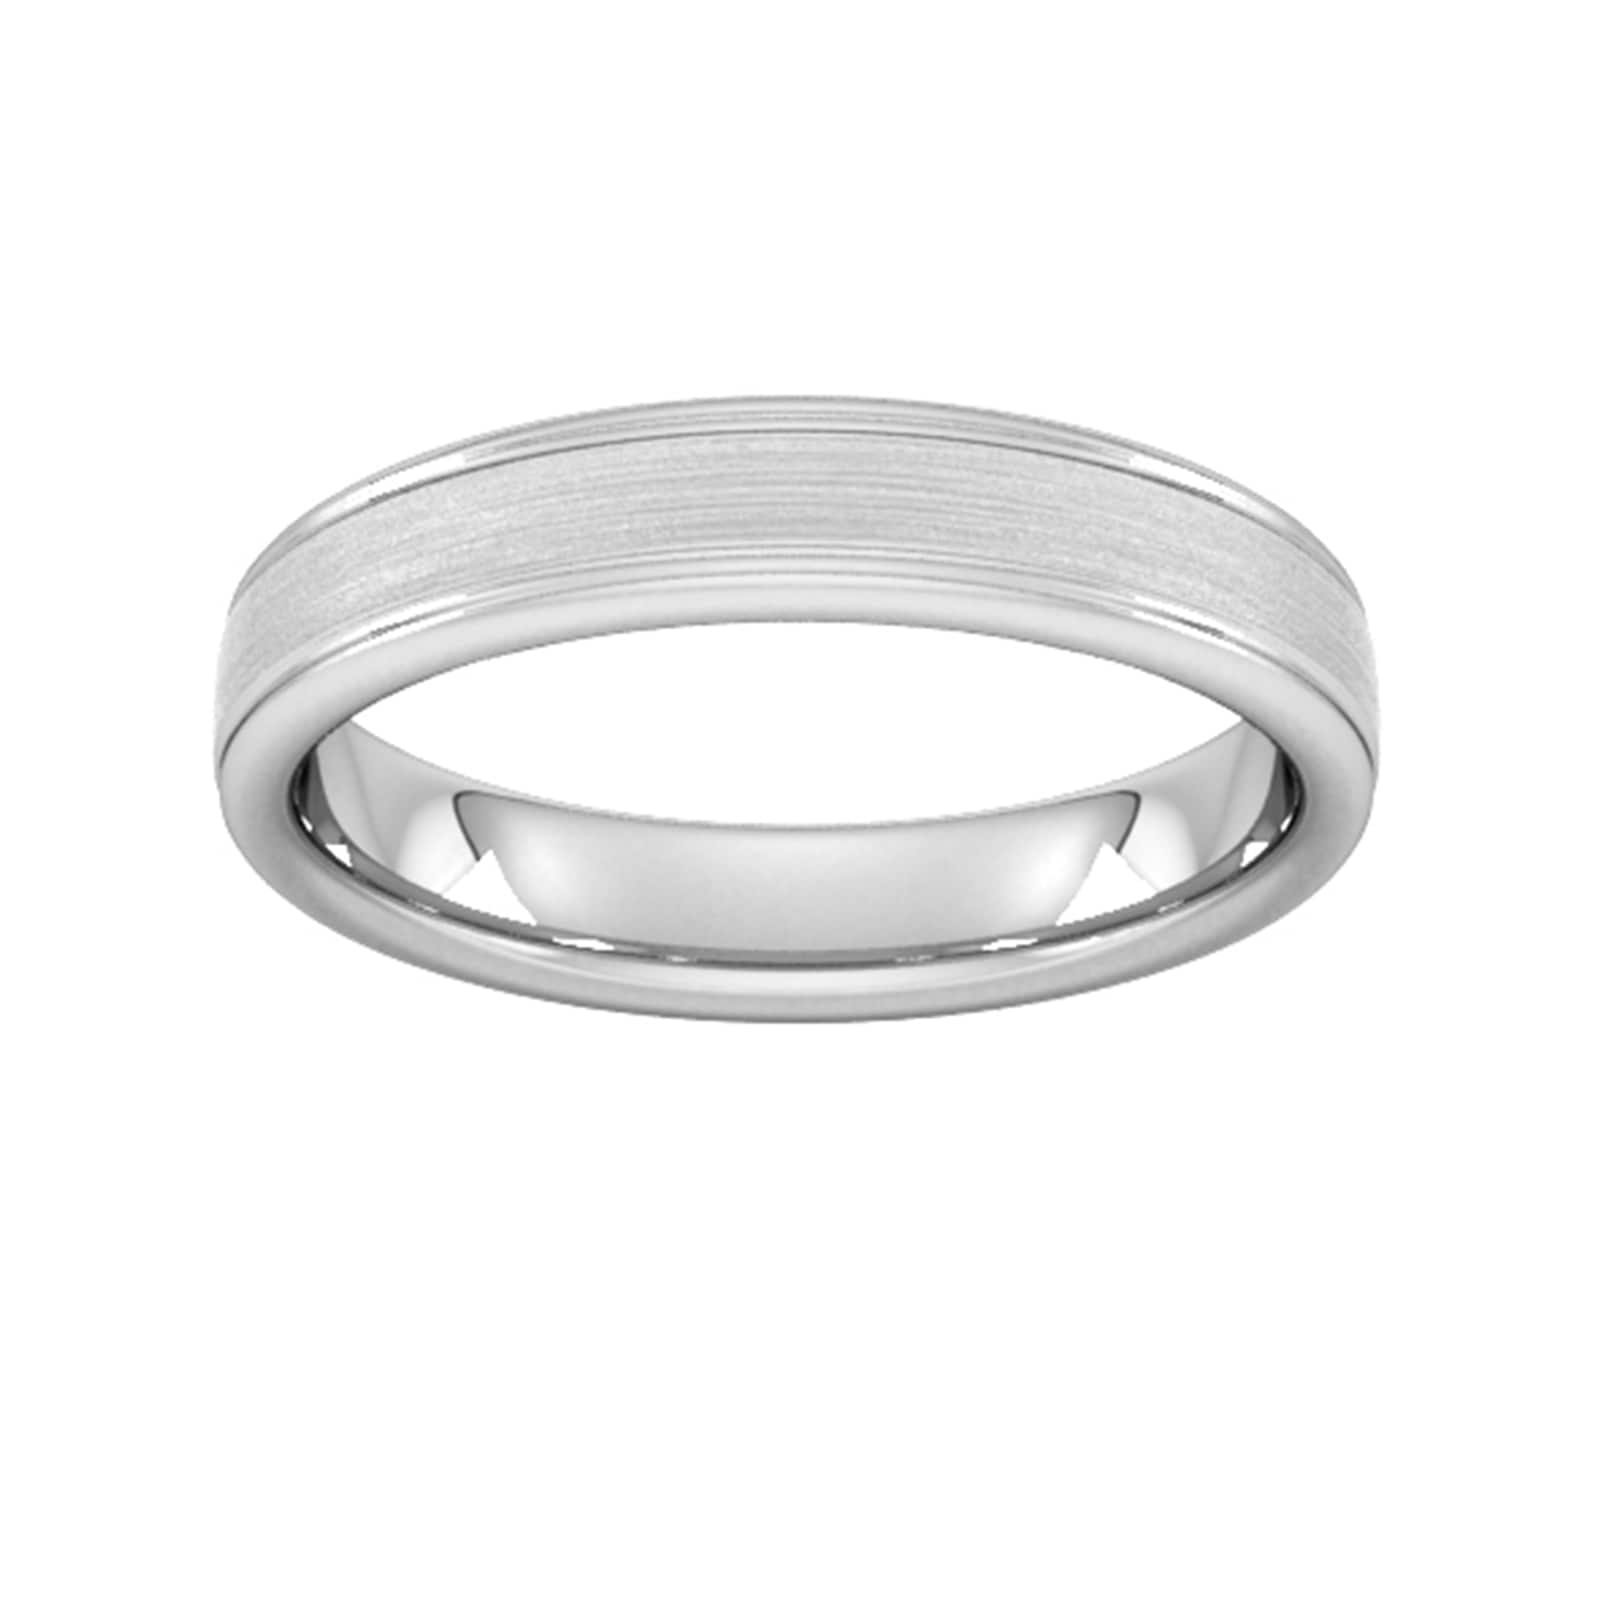 4mm Traditional Court Standard Matt Centre With Grooves Wedding Ring In Platinum - Ring Size Q